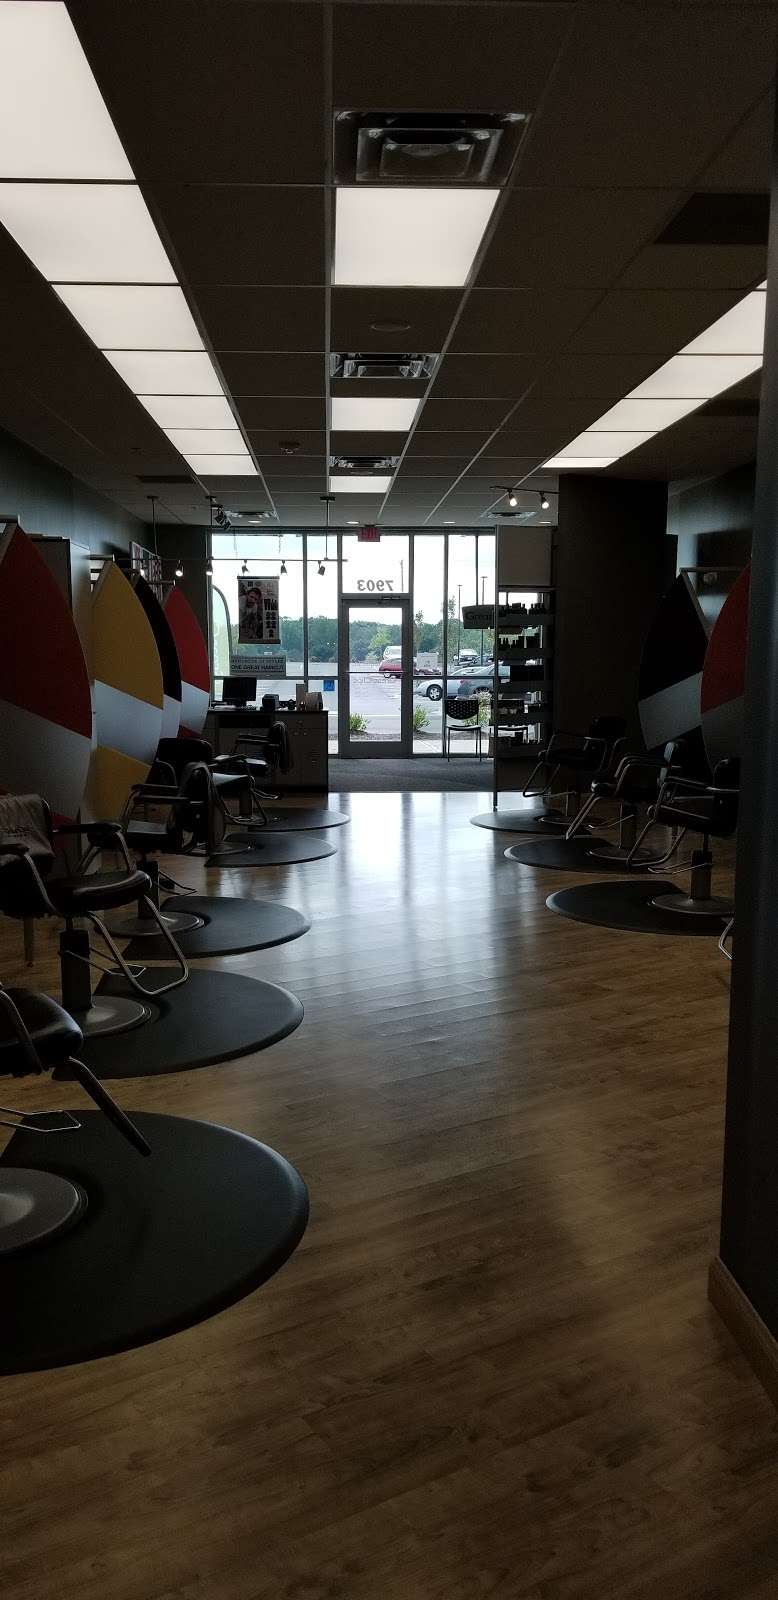 Great Clips | 7903 Village Center N, Sherrills Ford, NC 28673, USA | Phone: (980) 222-7471